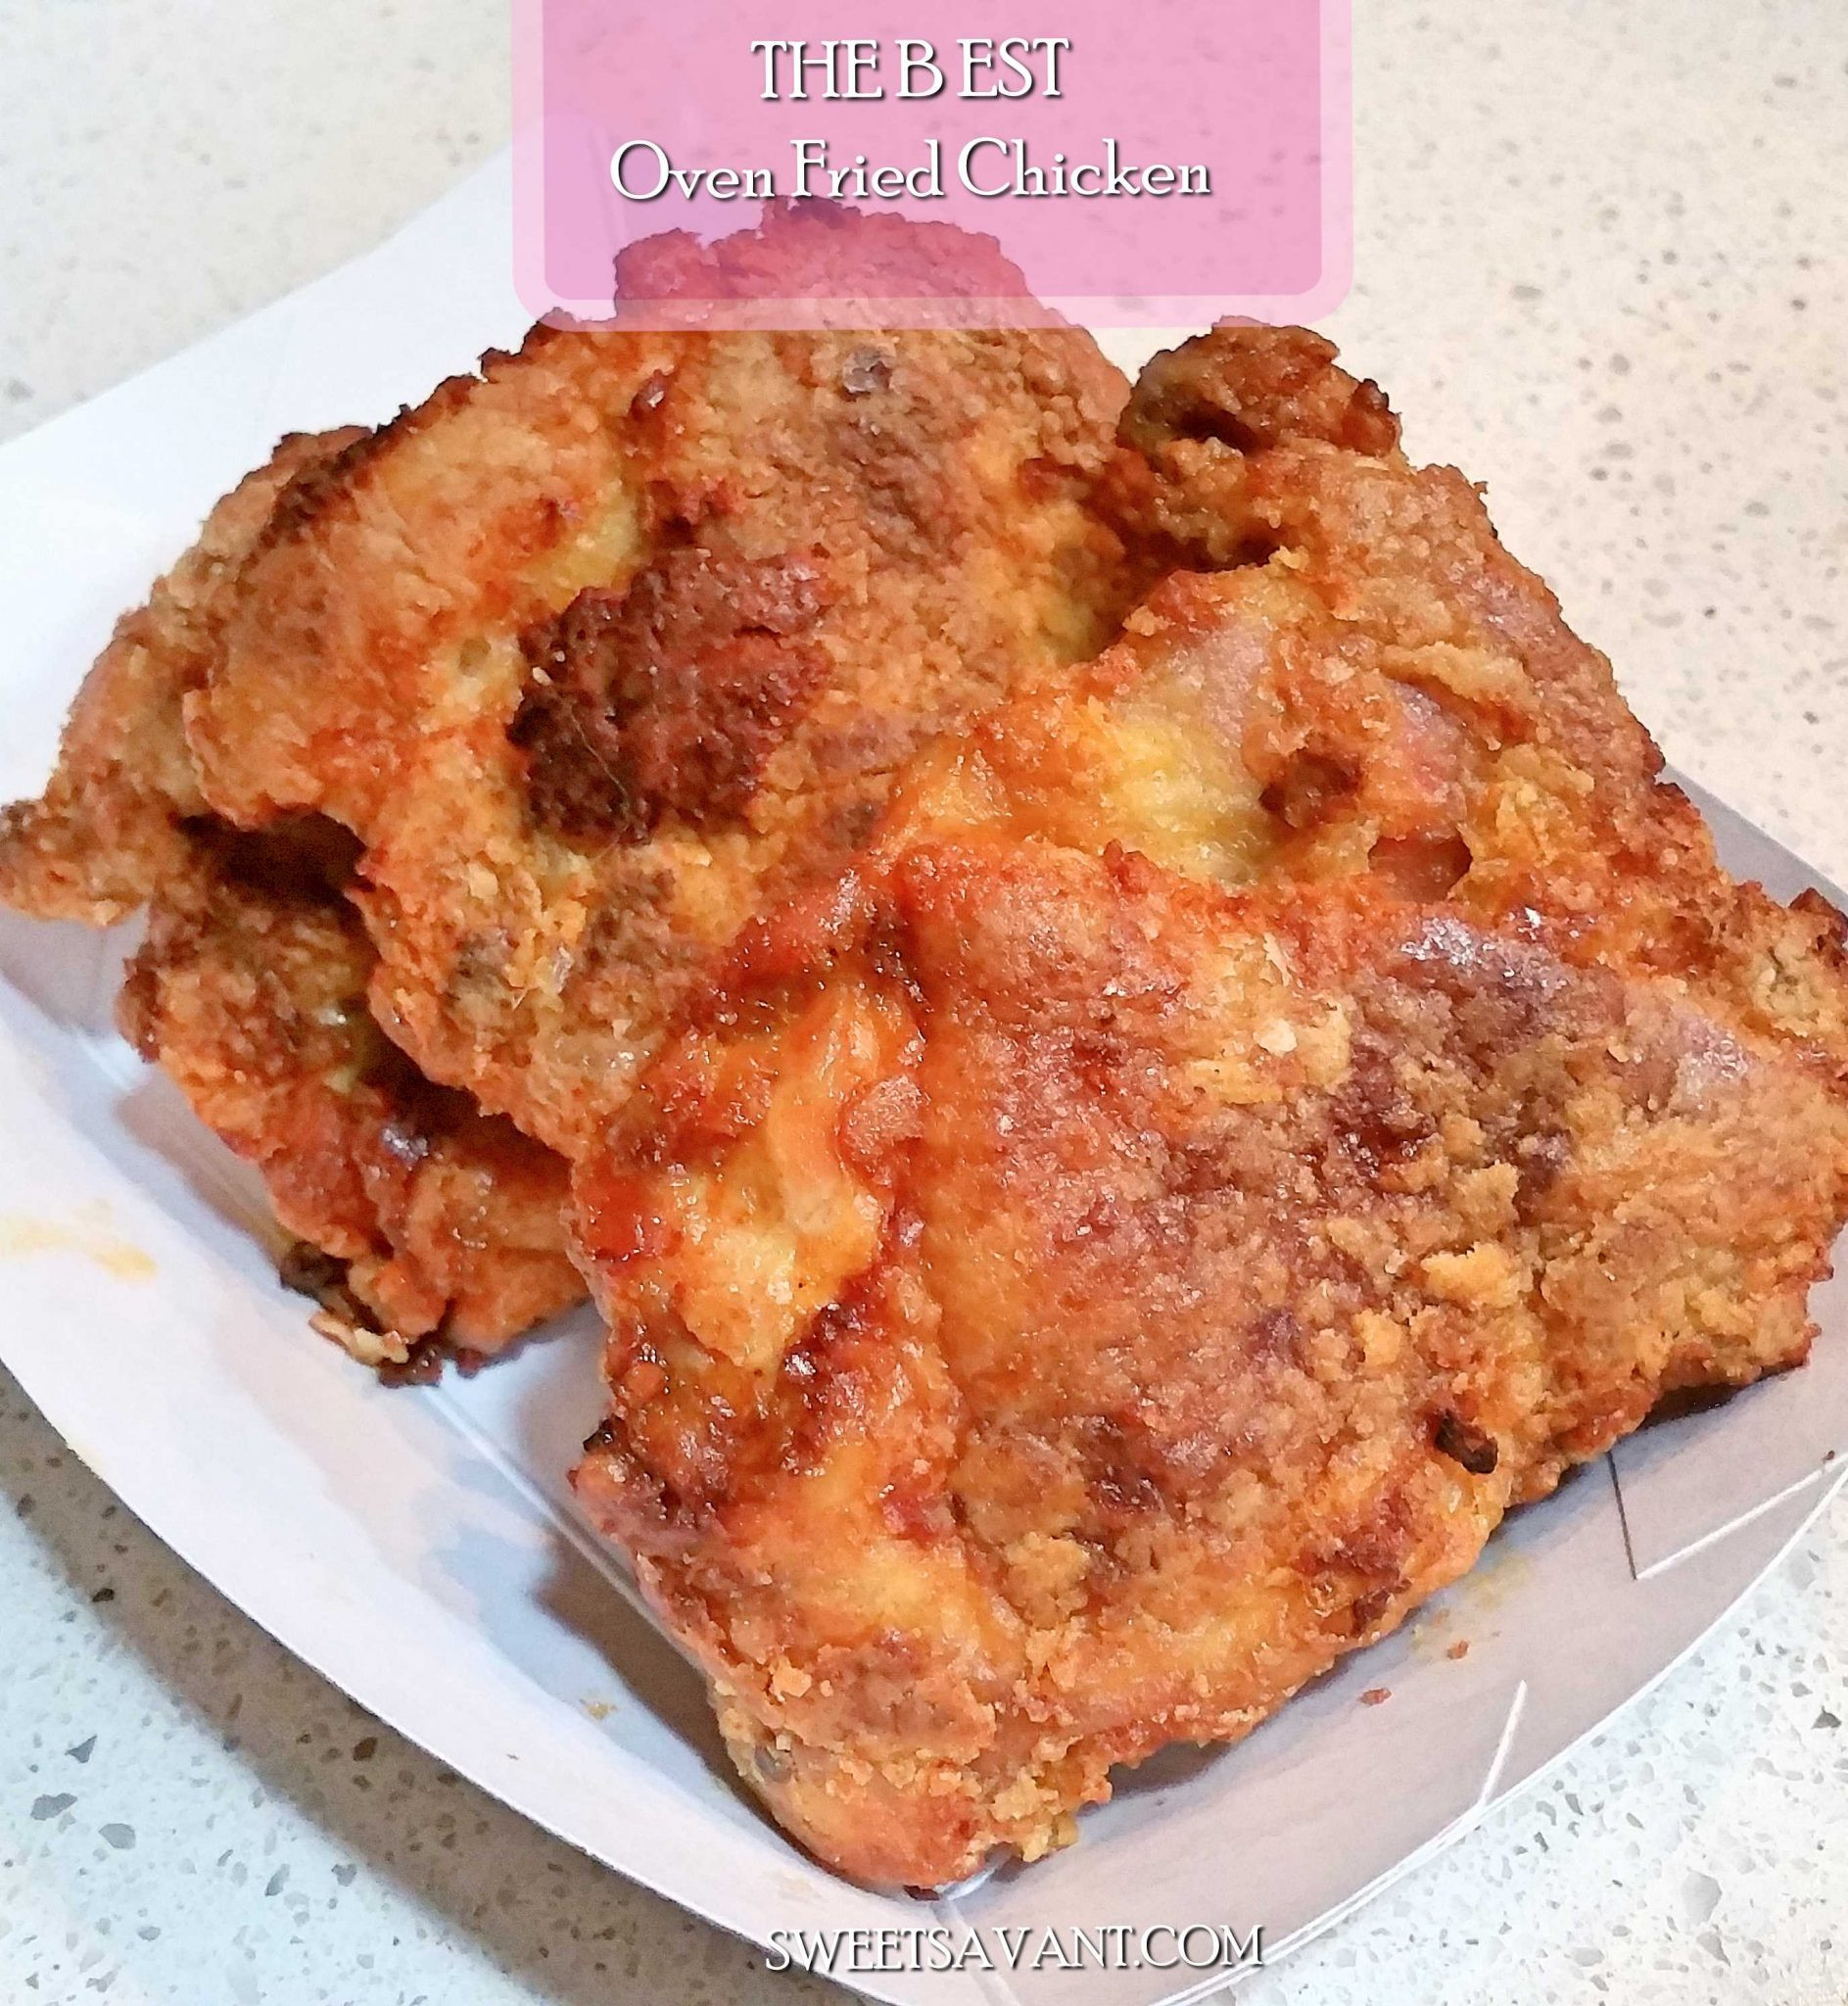 Best Oil For Fried Chicken
 the best oven fried chicken recipe ever Sweet Savant